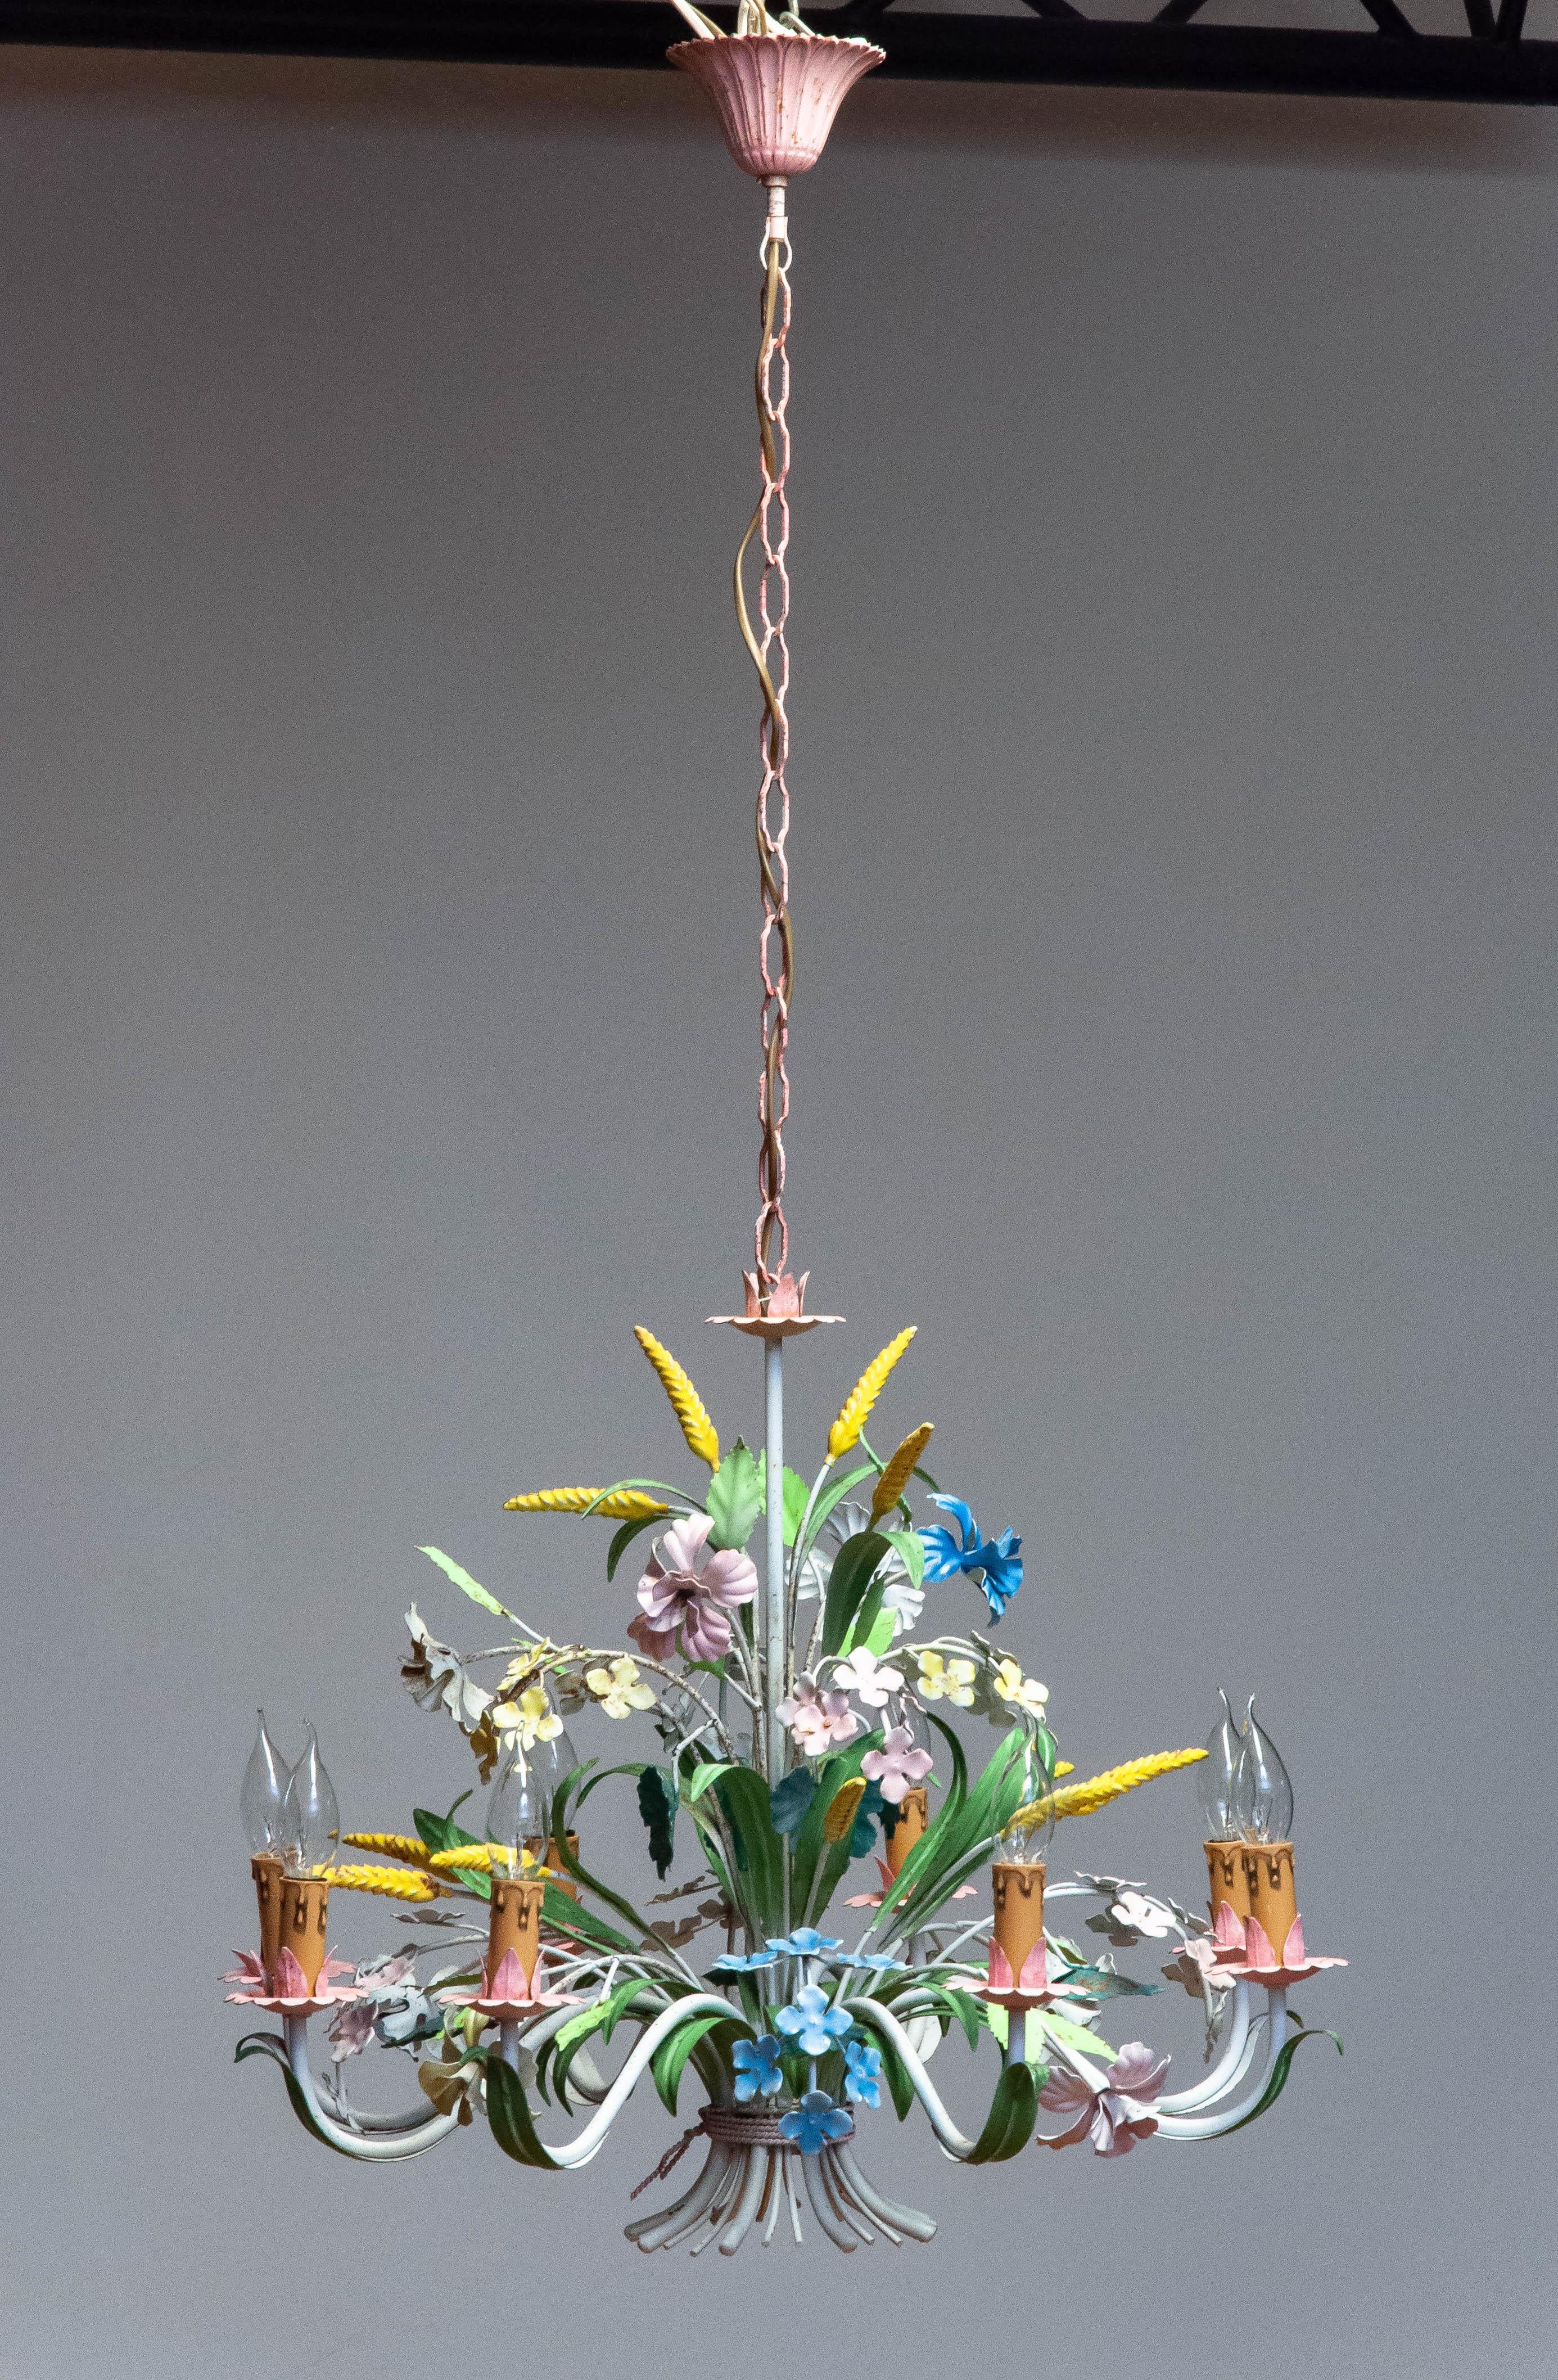 1950s Large Boho Chic Italian Tole Painted Metal Chandelier With Floral Decor 3